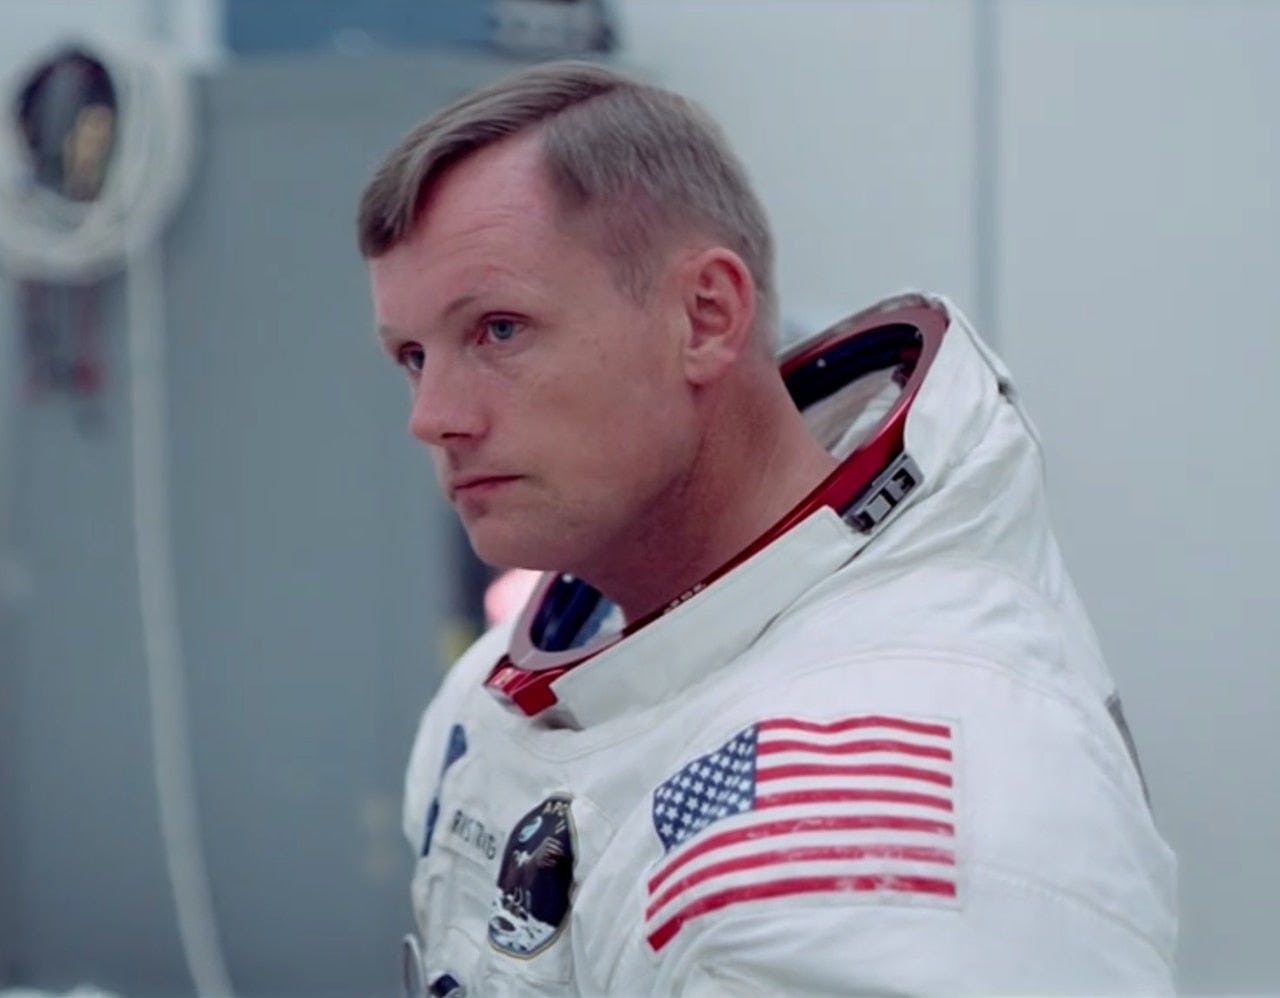 Before: On July 16, 1969, mission commander Neil Armstrong listens intently as Apollo 11 prepared to take off on an enormous Saturn V rocket for the Moon